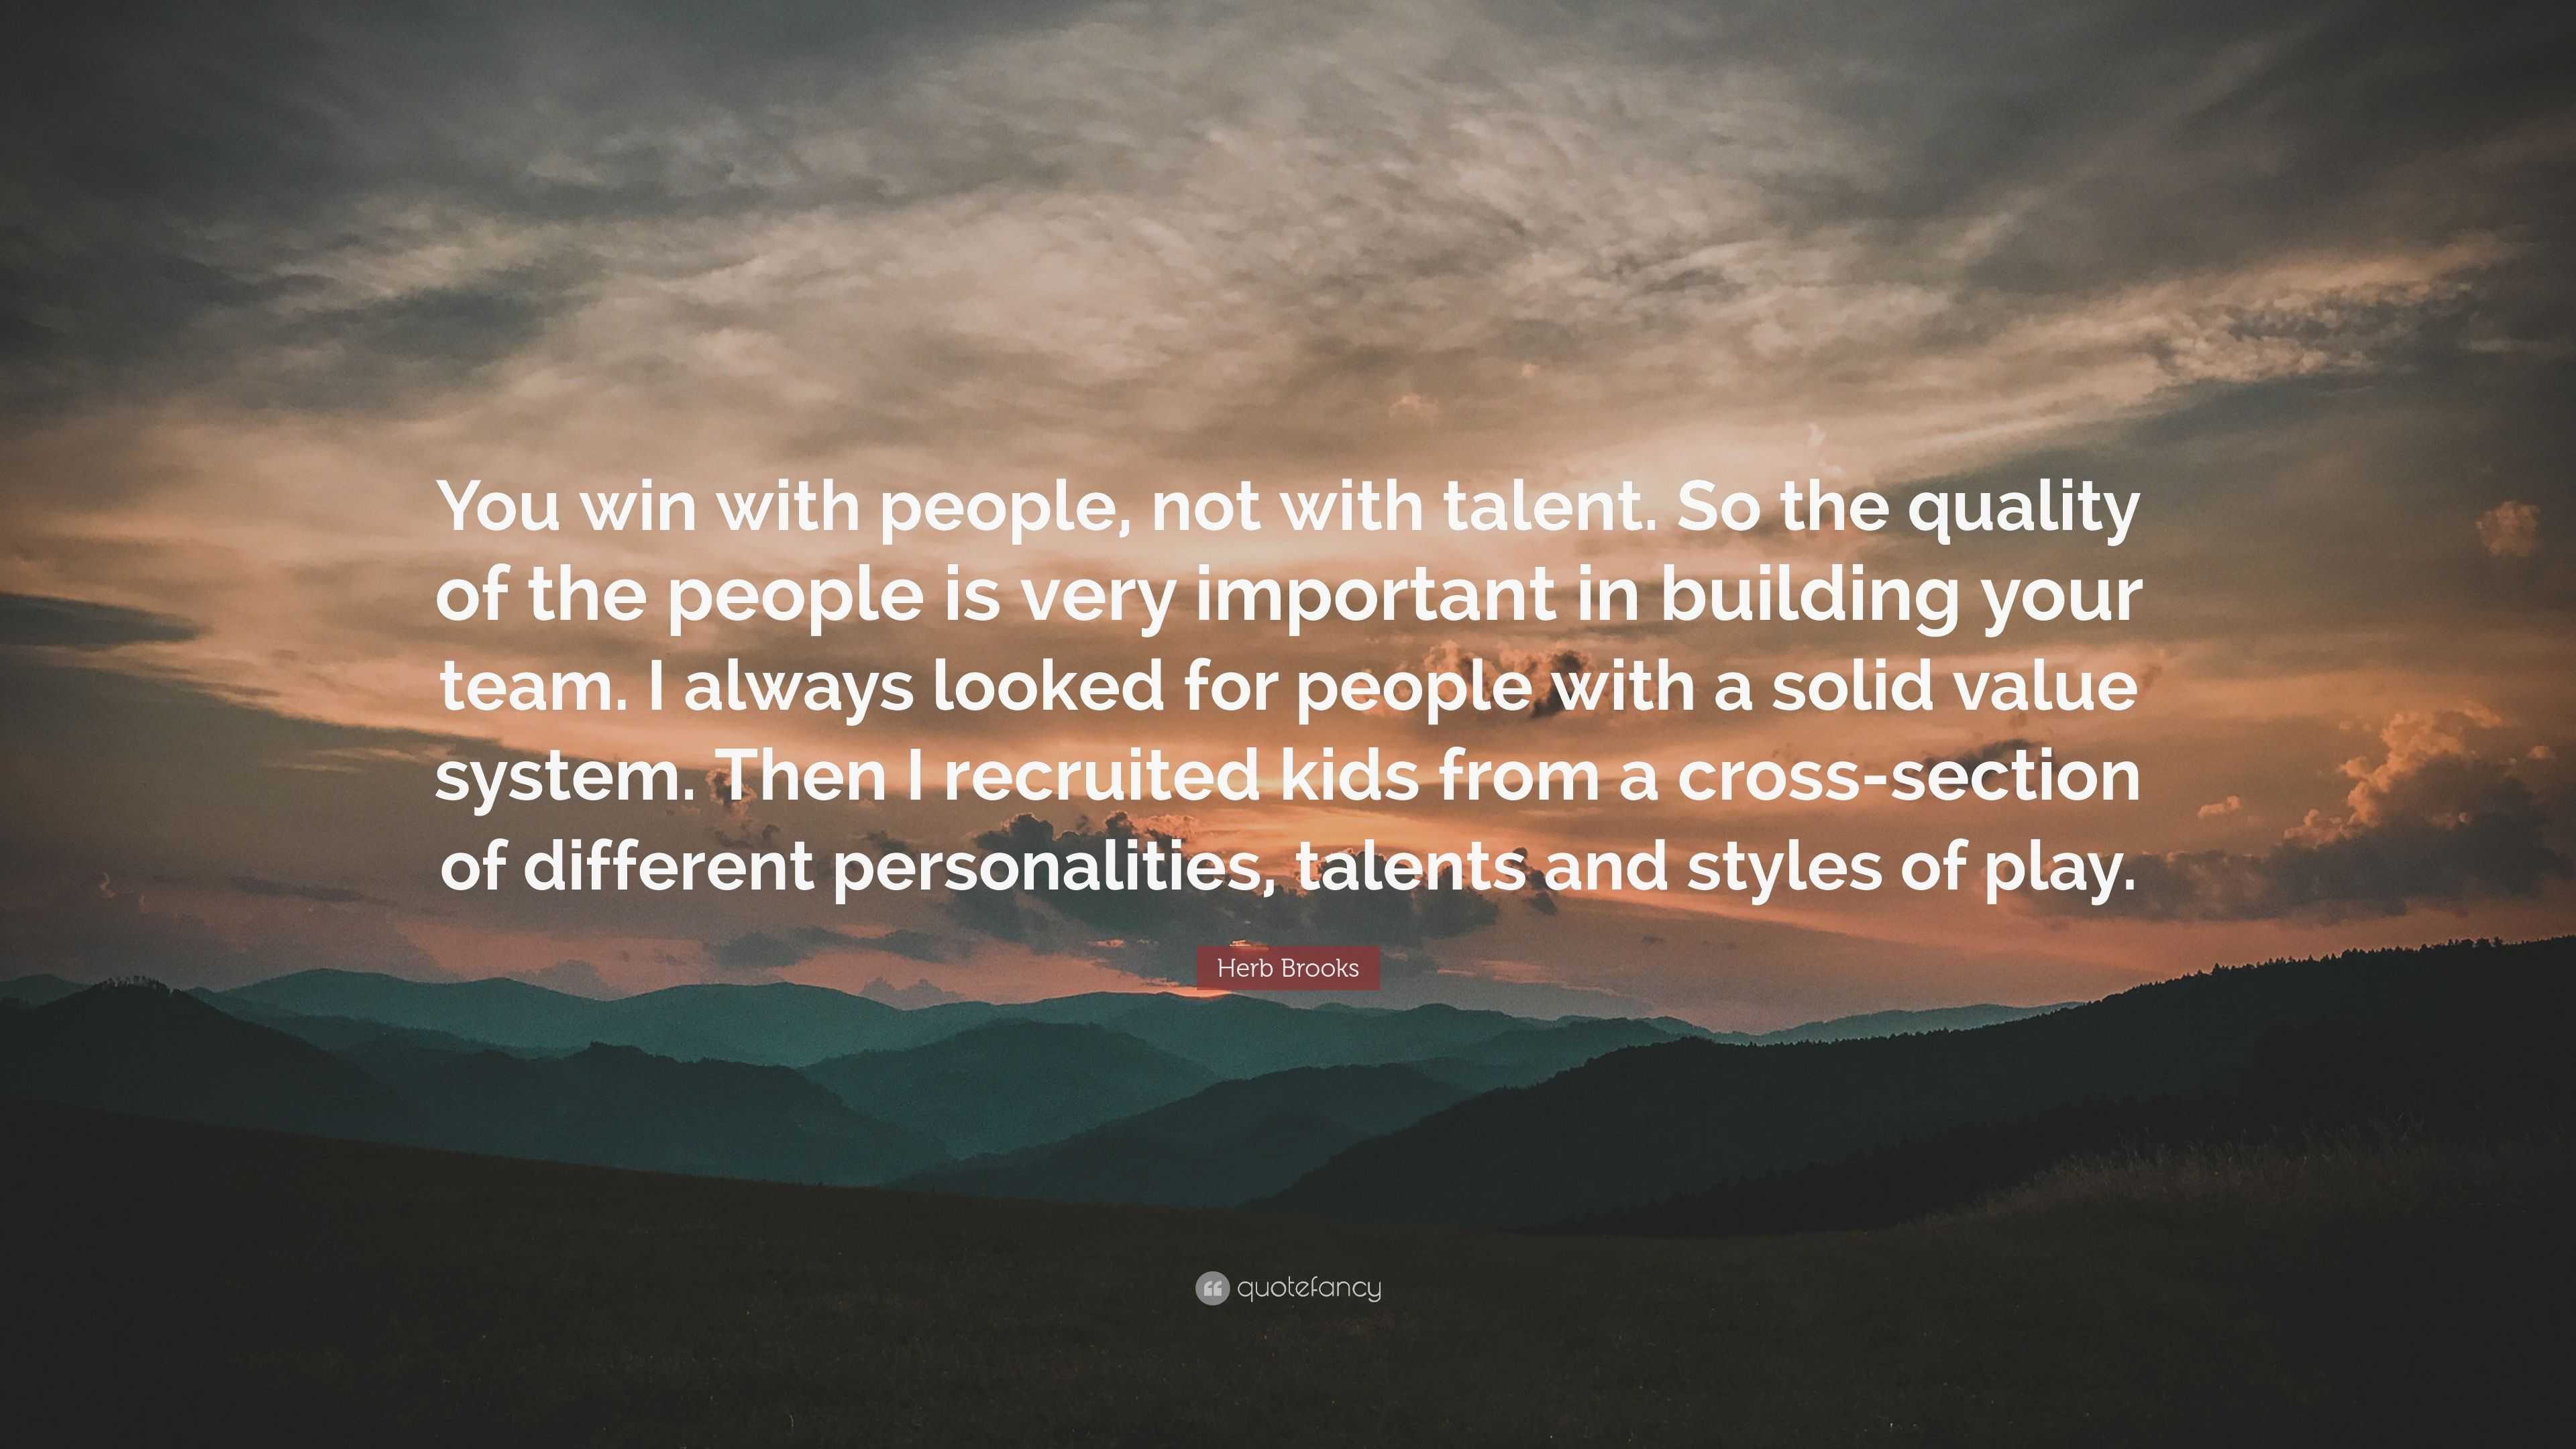 4878146 Herb Brooks Quote You win with people not with talent So the